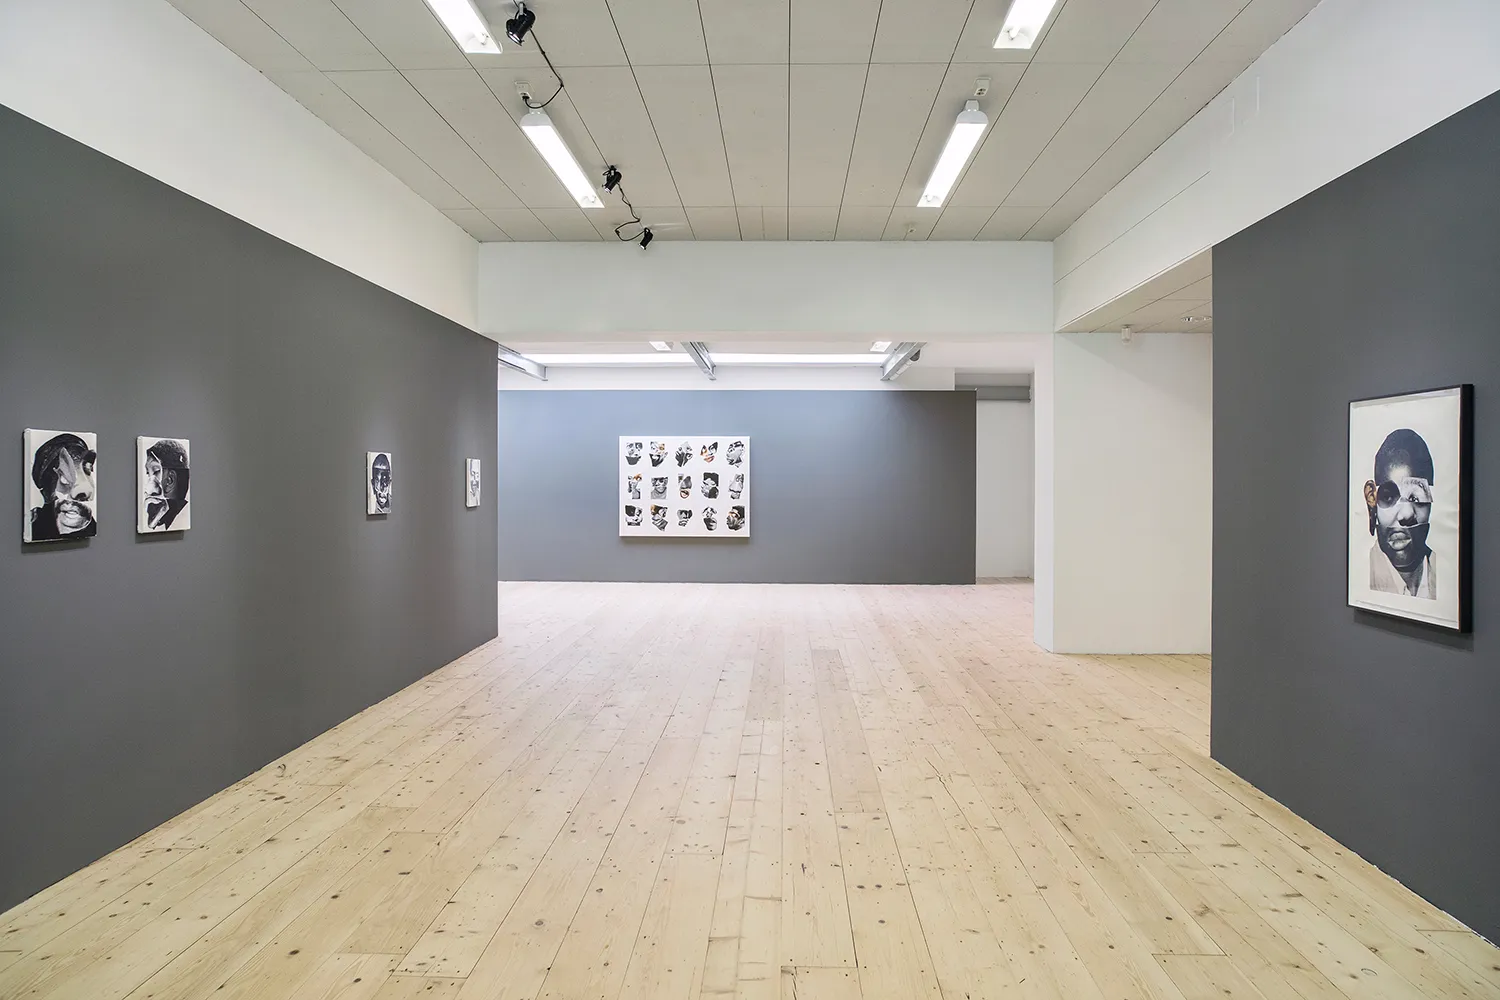 View of the gallery space with works on canvas by the artist hanging on dark grey walls